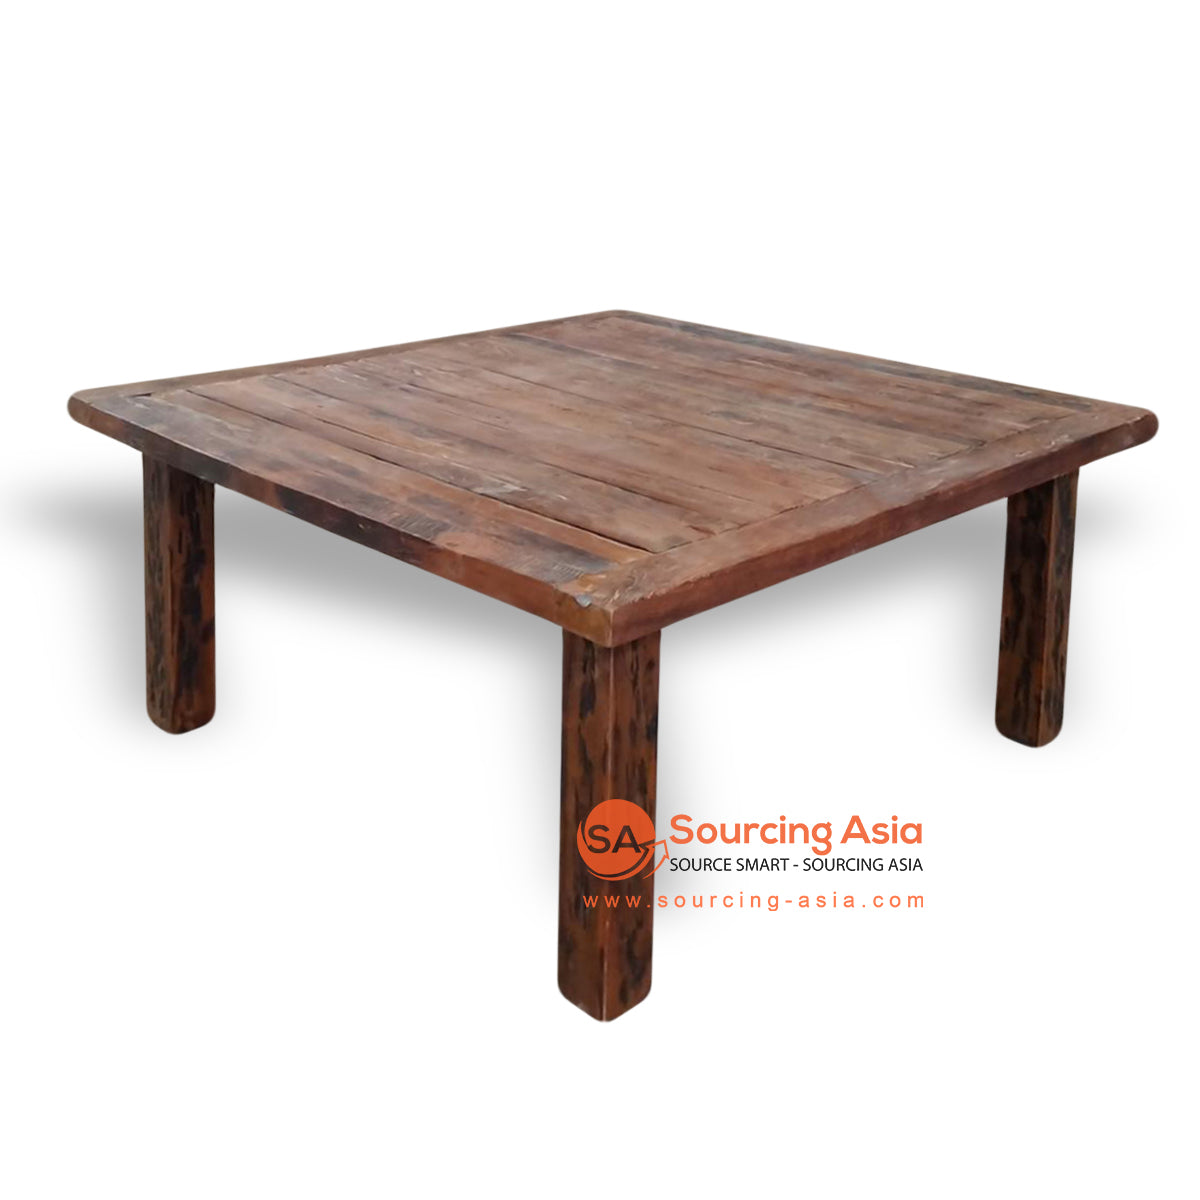 ECL203 NATURAL RECYCLED TEAK WOOD RUSTIC RAILWAY SLEEPER DINING TABLE